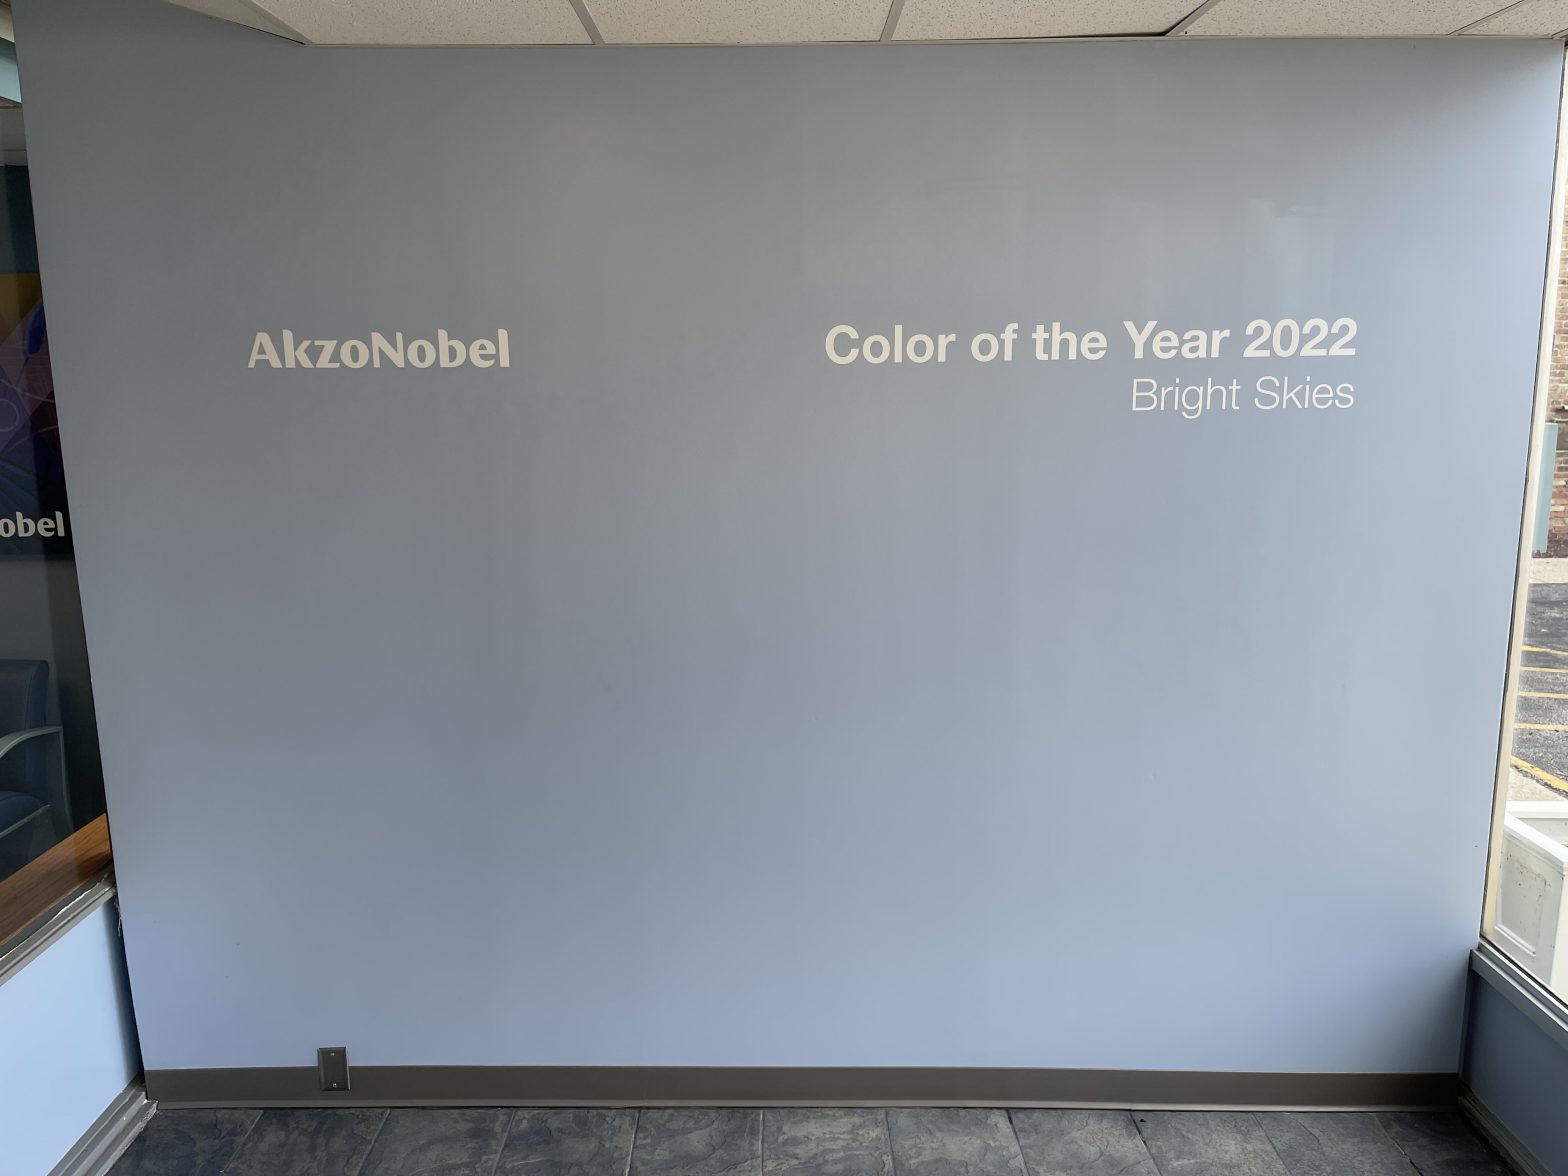 Vinyl graphics for AkzoNobel printed by Signs Now in Chicago, IL